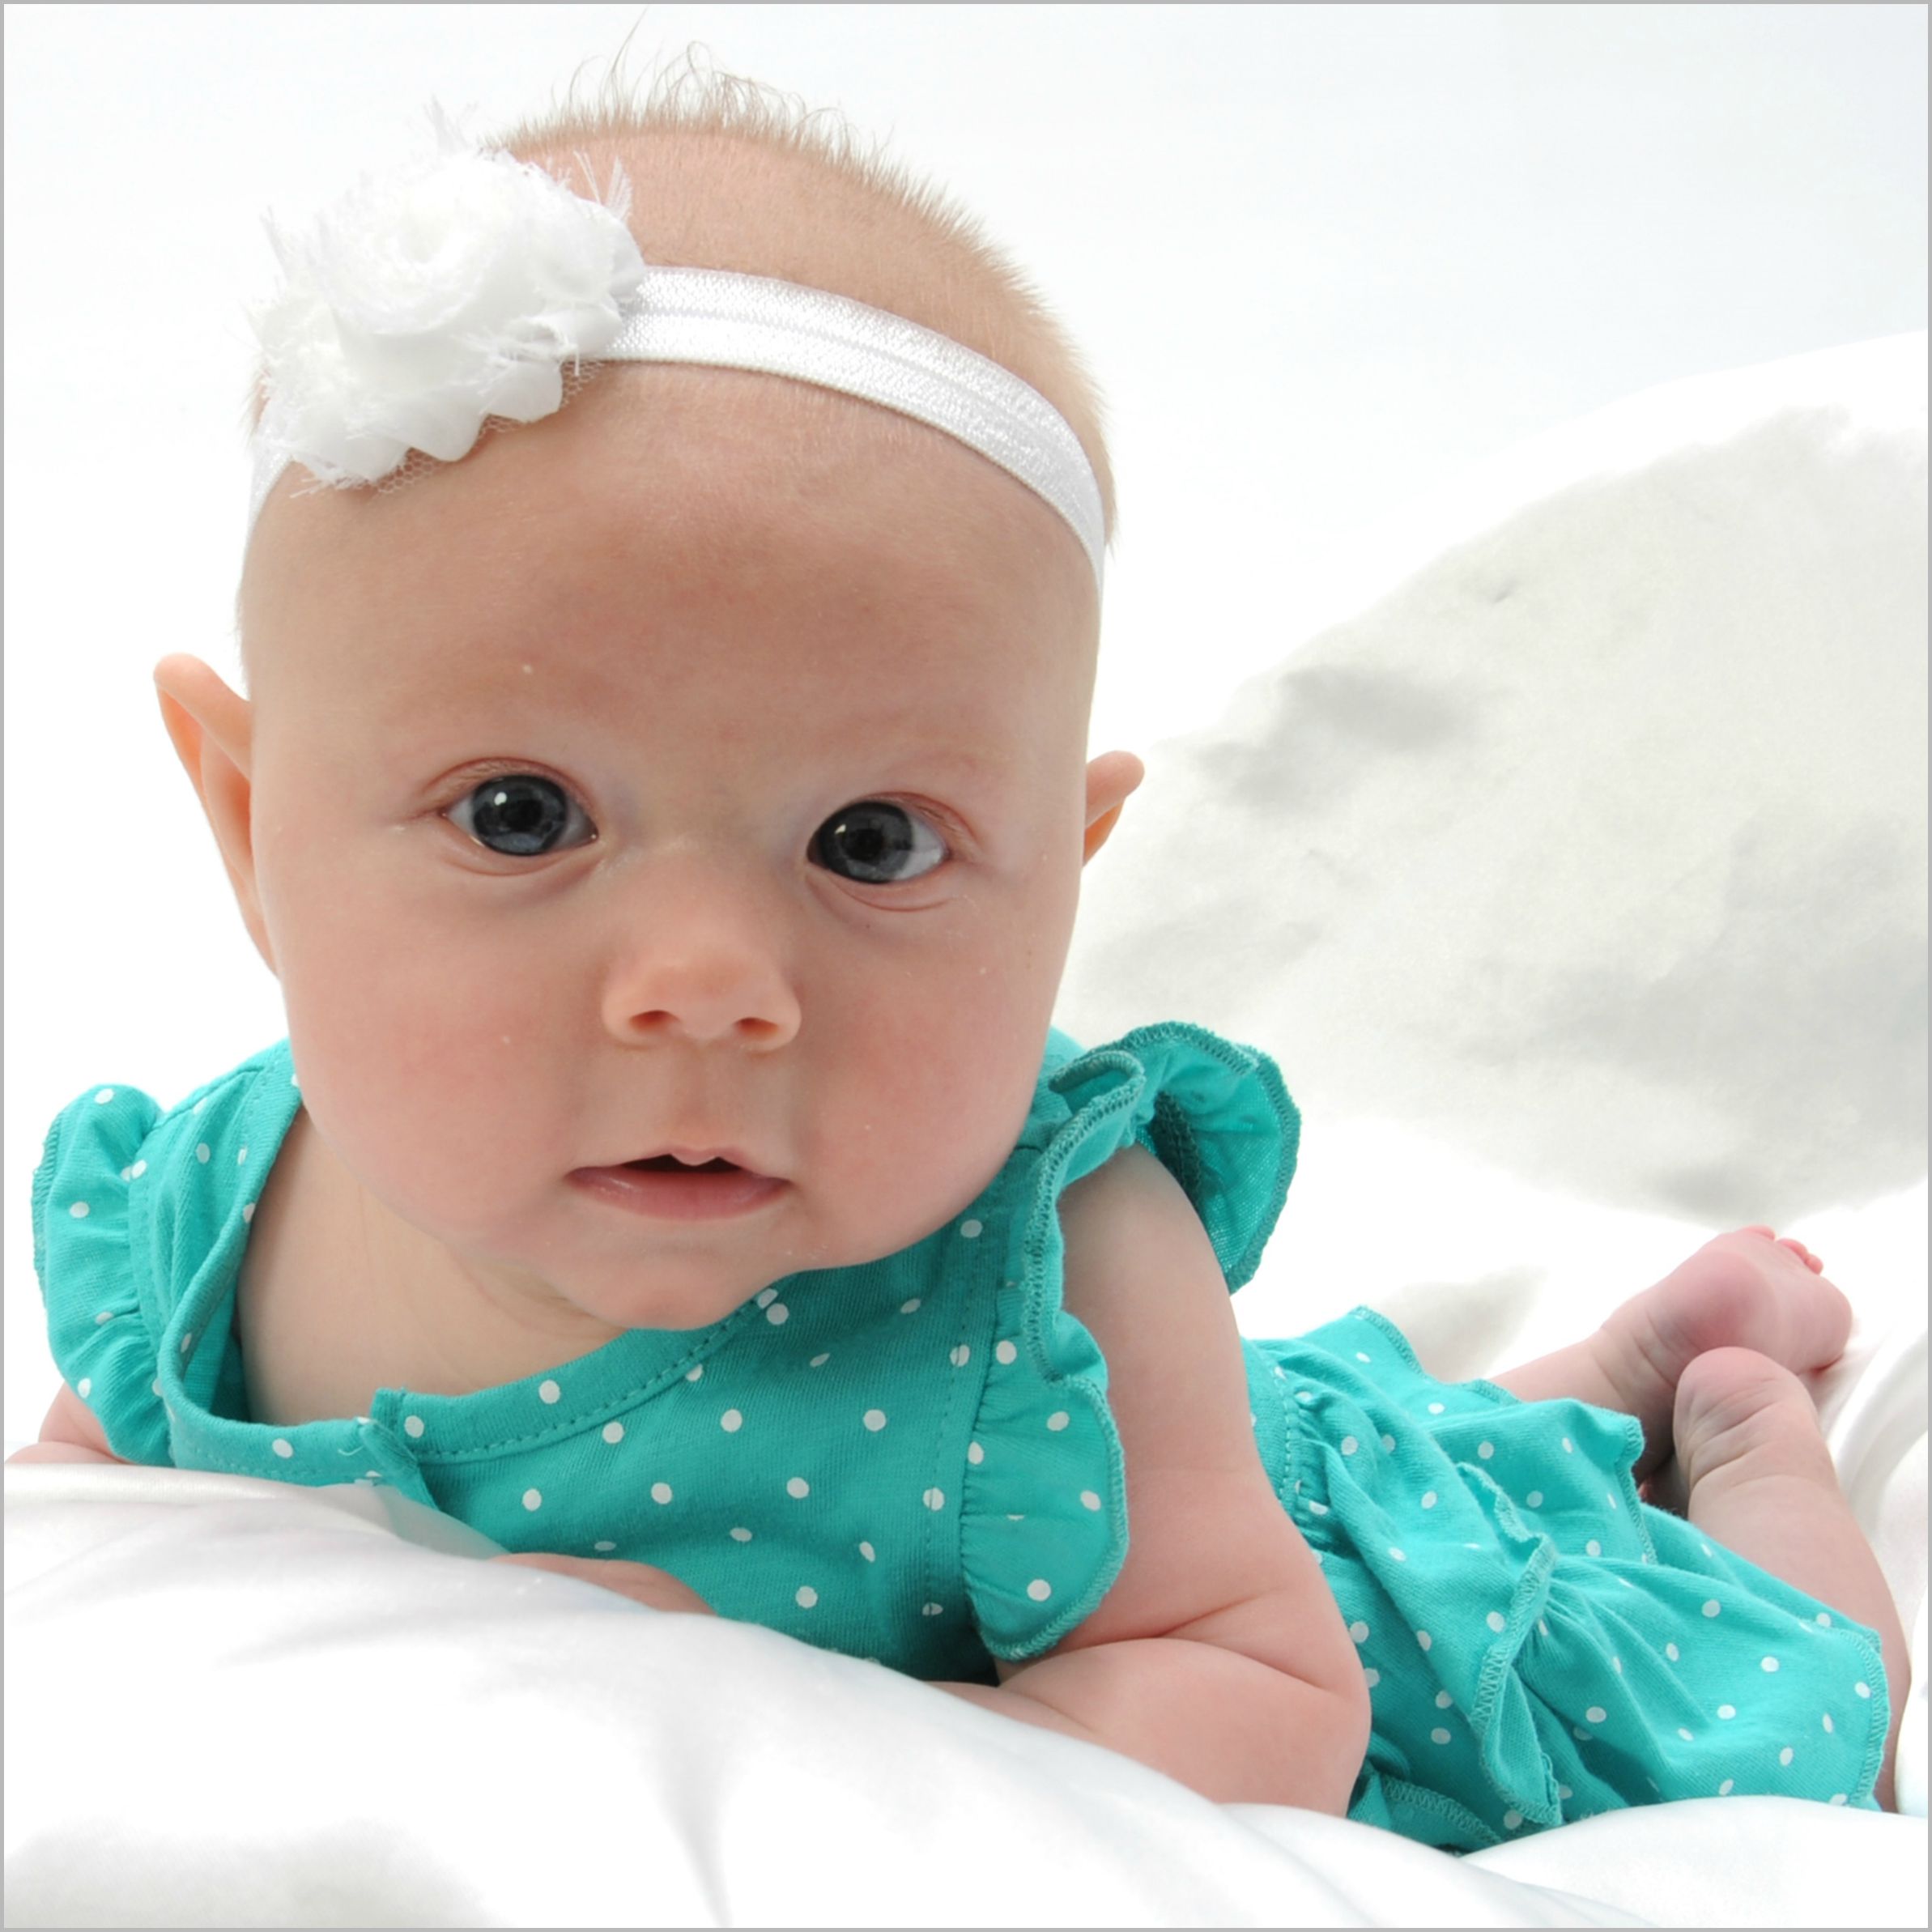 4 Simple Tips for Adorable Baby Portraits